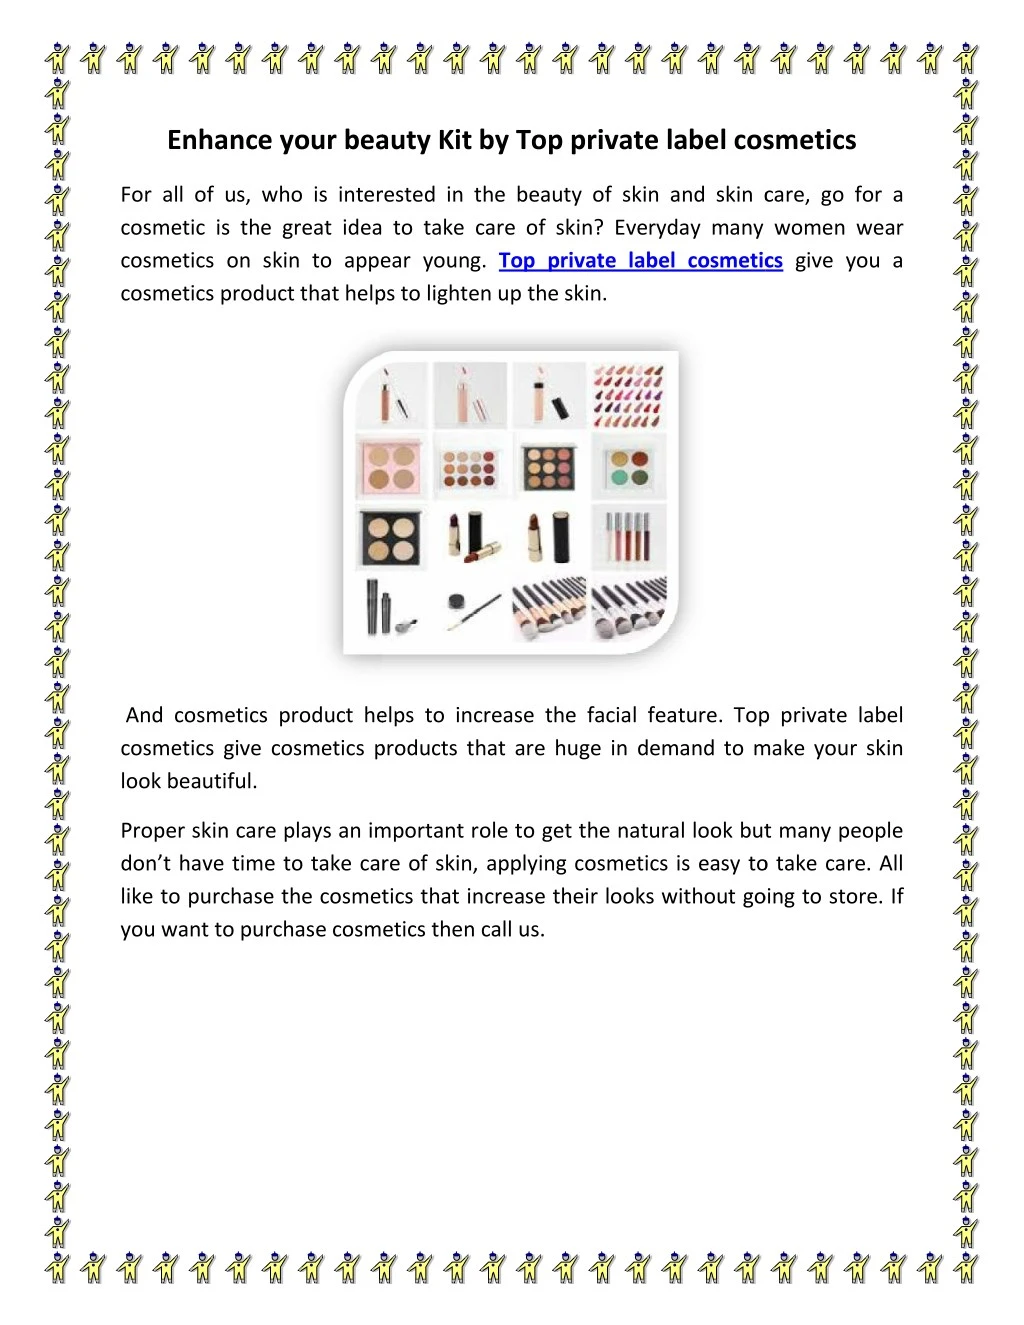 enhance your beauty kit by top private label